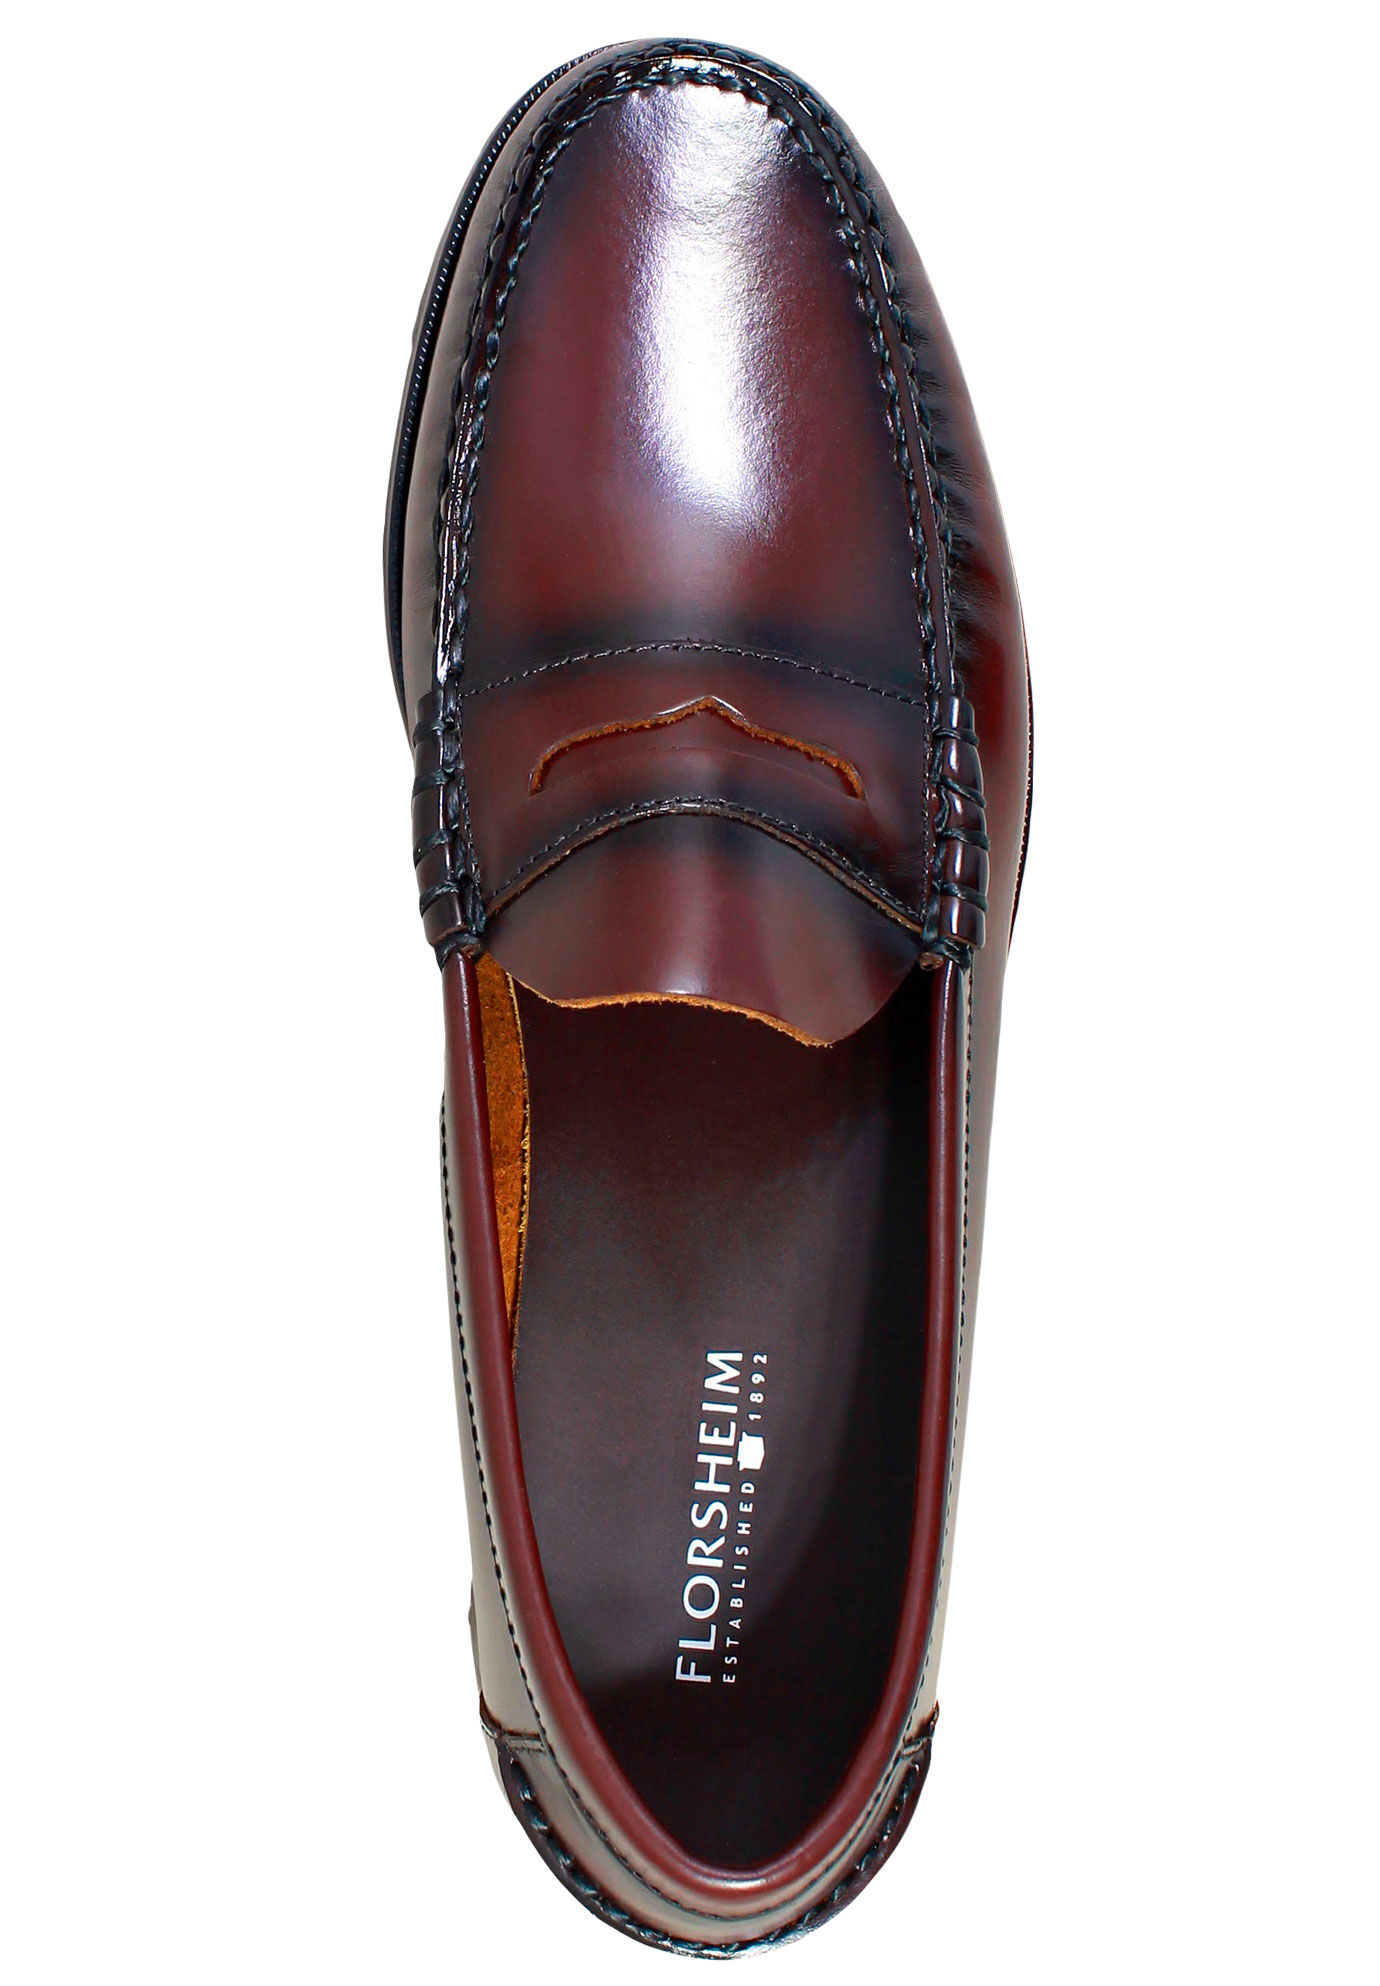 florsheim penny loafers